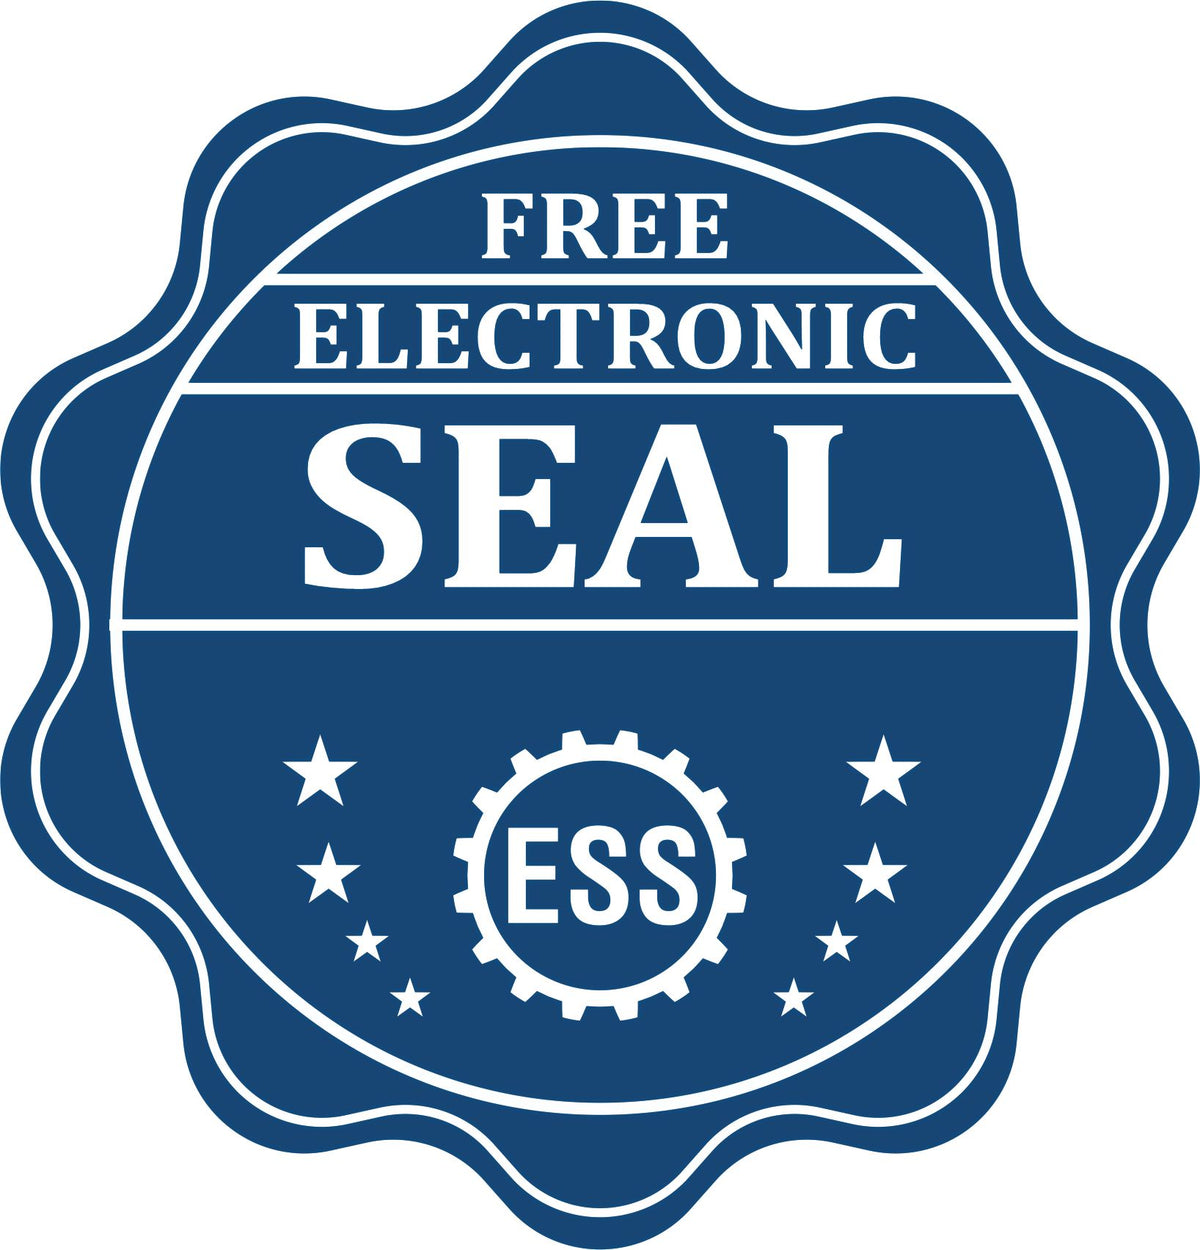 A badge showing a free electronic seal for the Gift Rhode Island Land Surveyor Seal with stars and the ESS gear on the emblem.